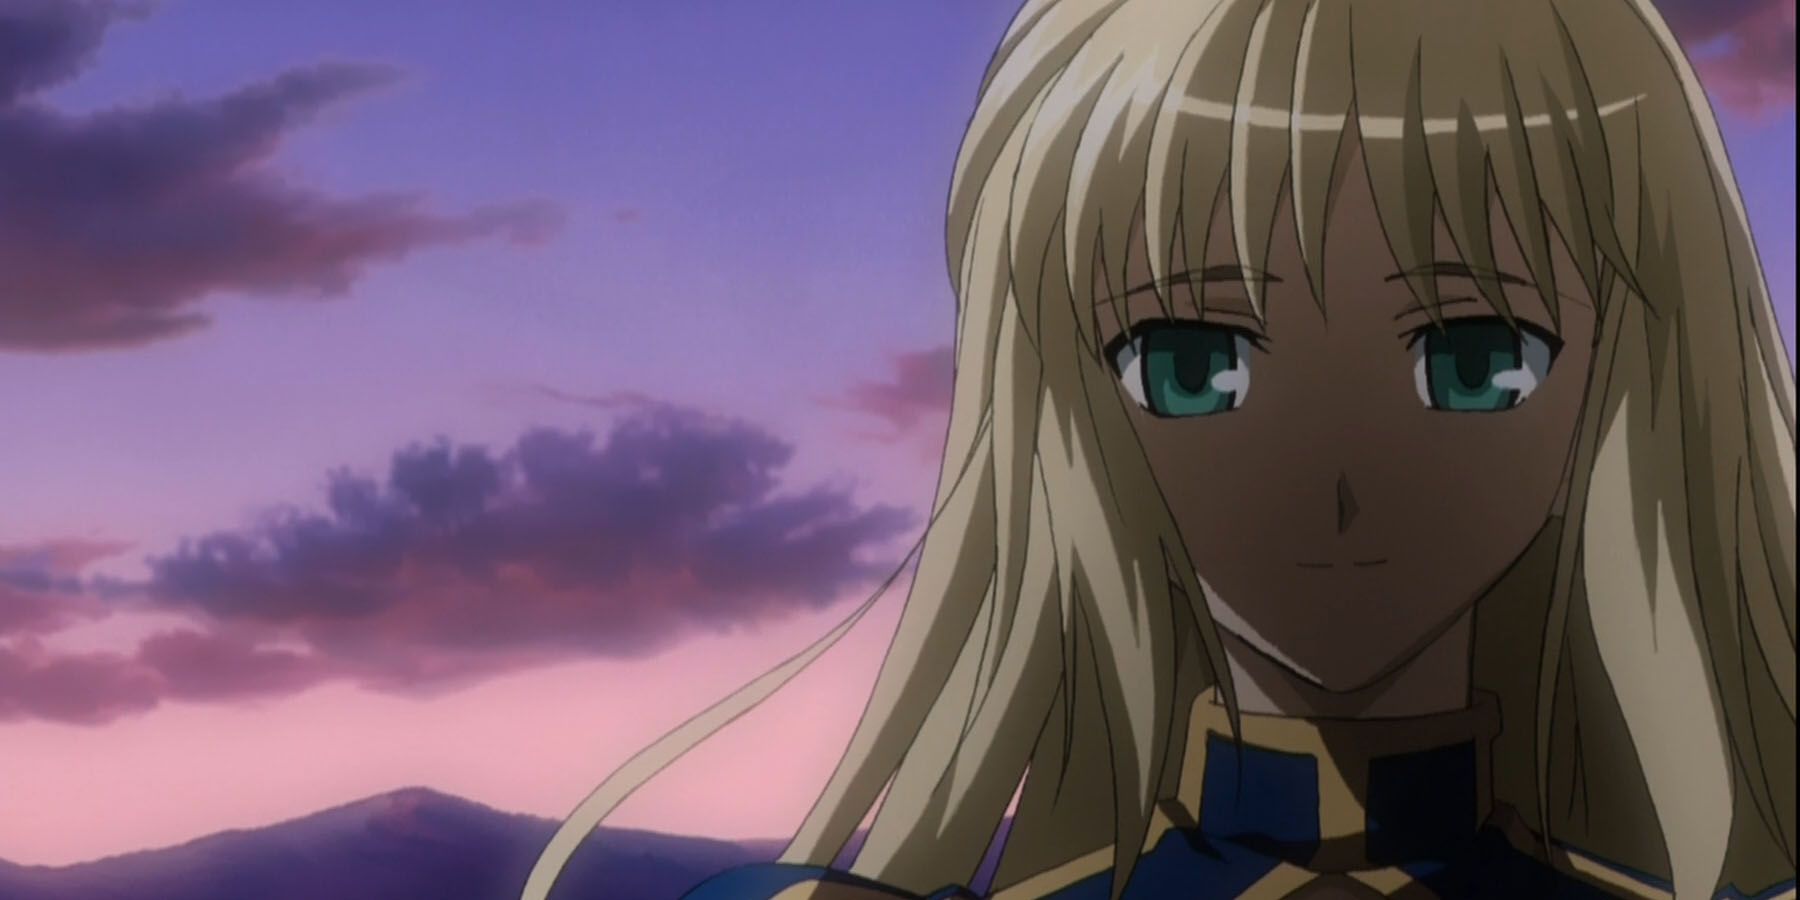 Saber of Fate Stay Night